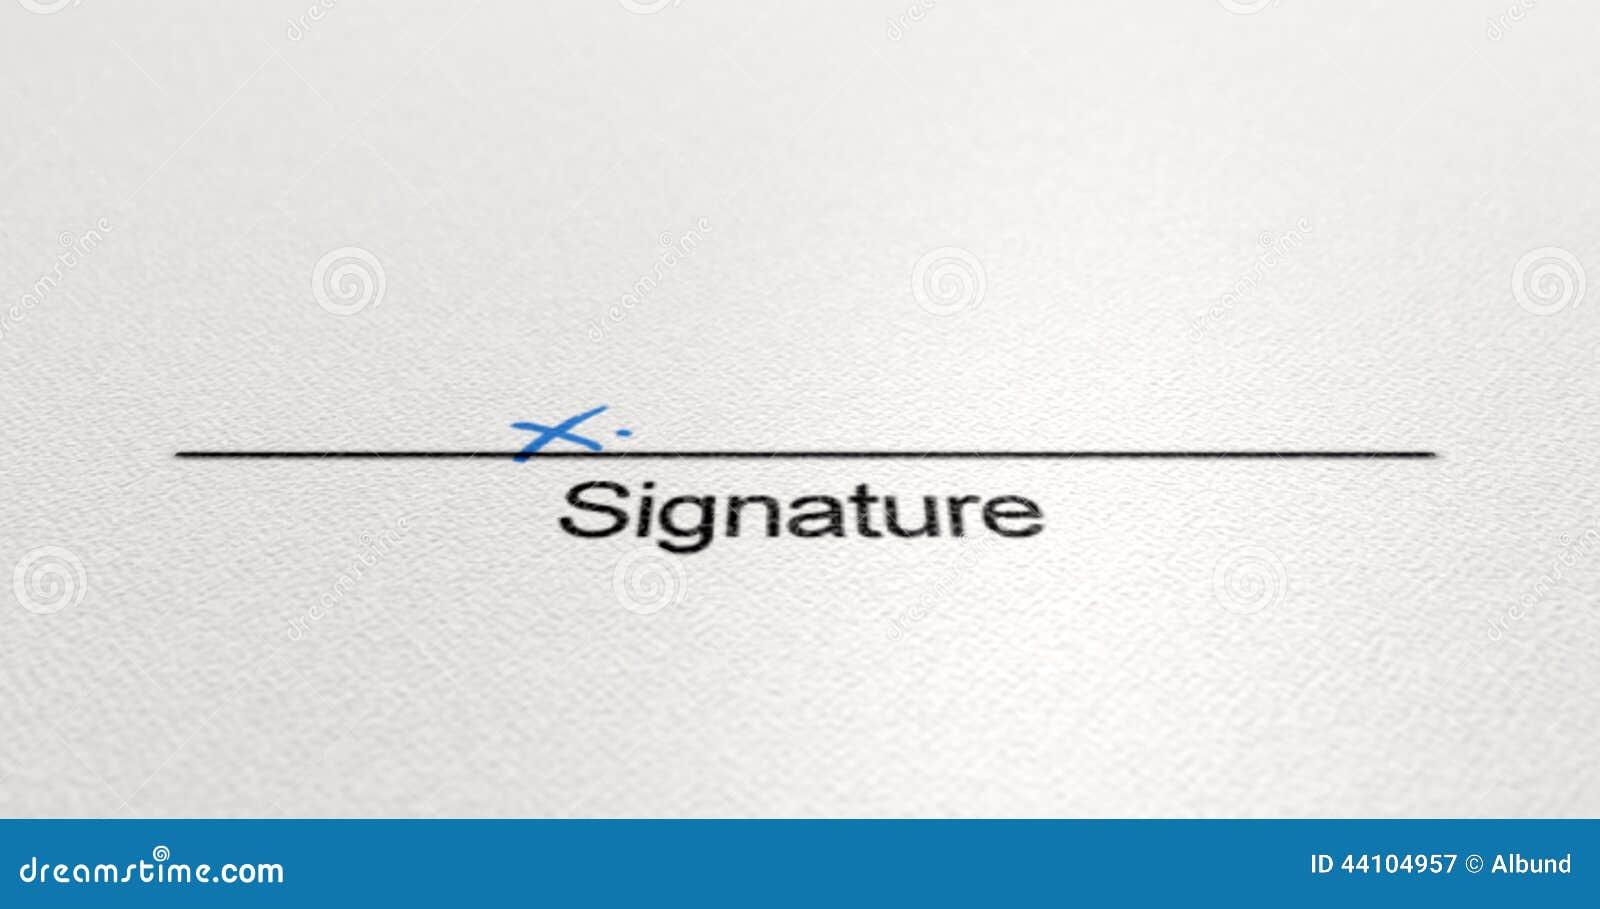 signature-area-x-white-paper-black-line-printed-ink-showing-to-be-signed-indicated-hand-written-44104957.jpg